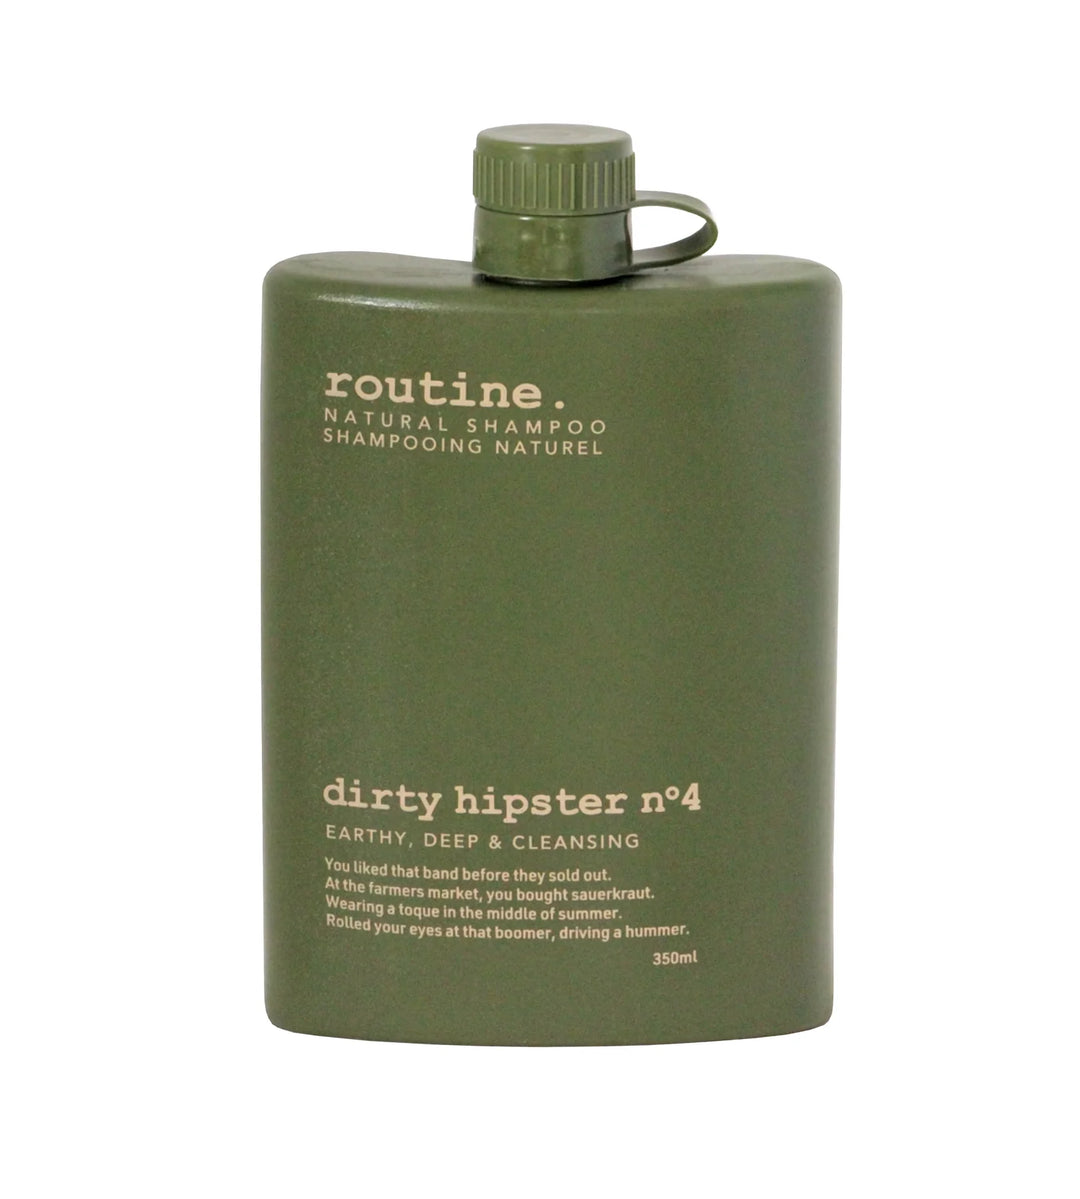 Routine Dirty Hipster No.4 Shampoo